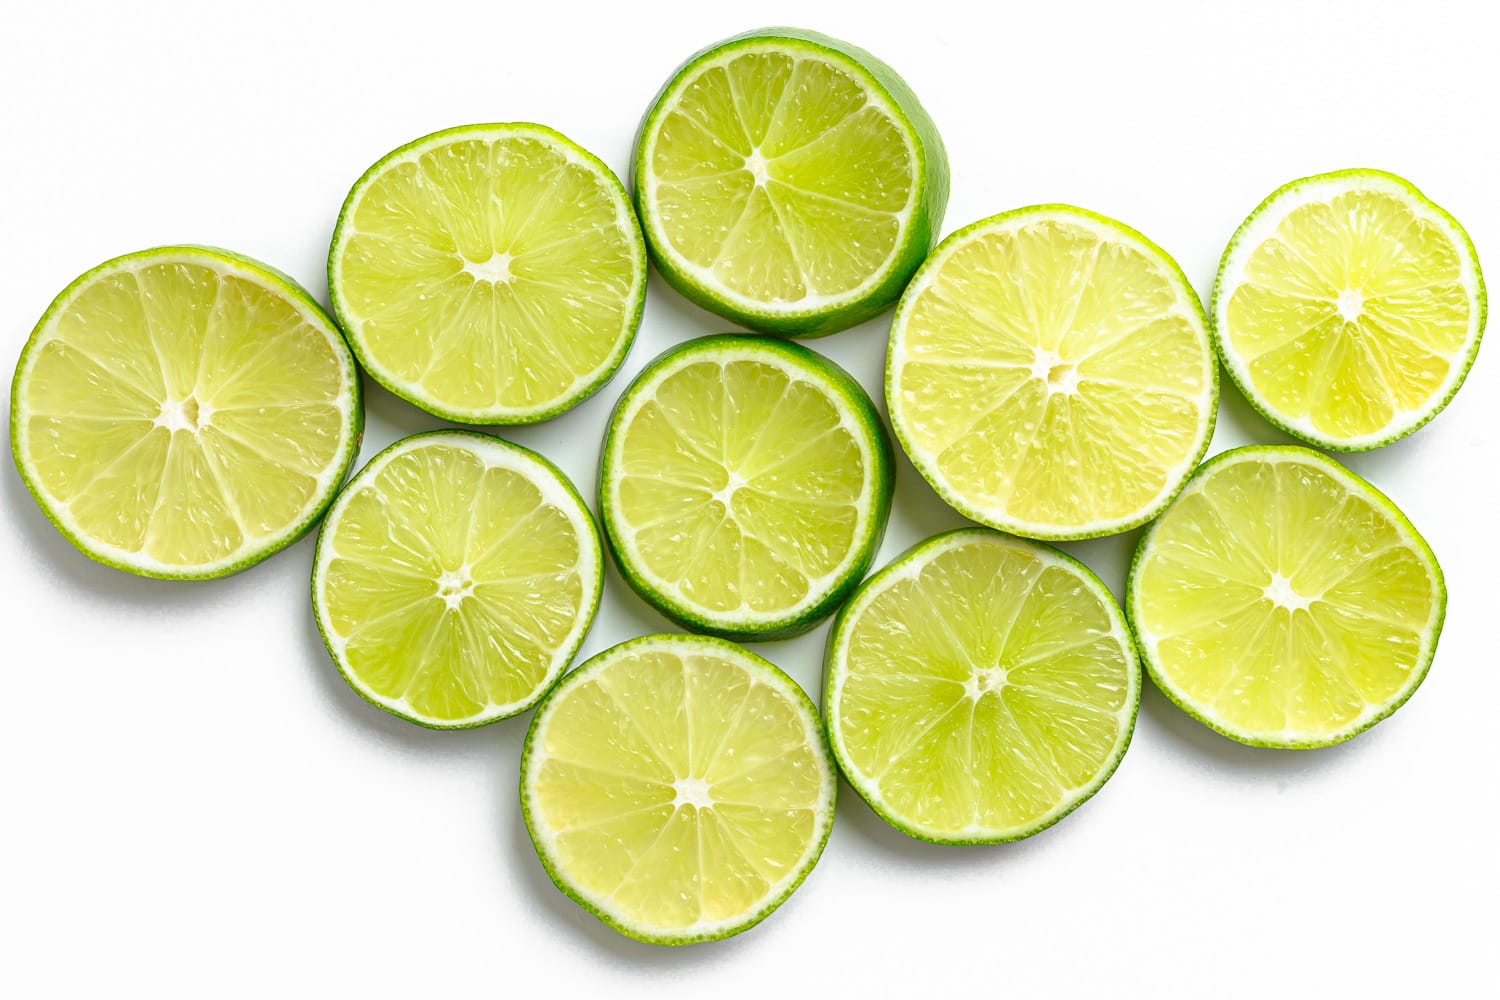 Lime slices on a white background.